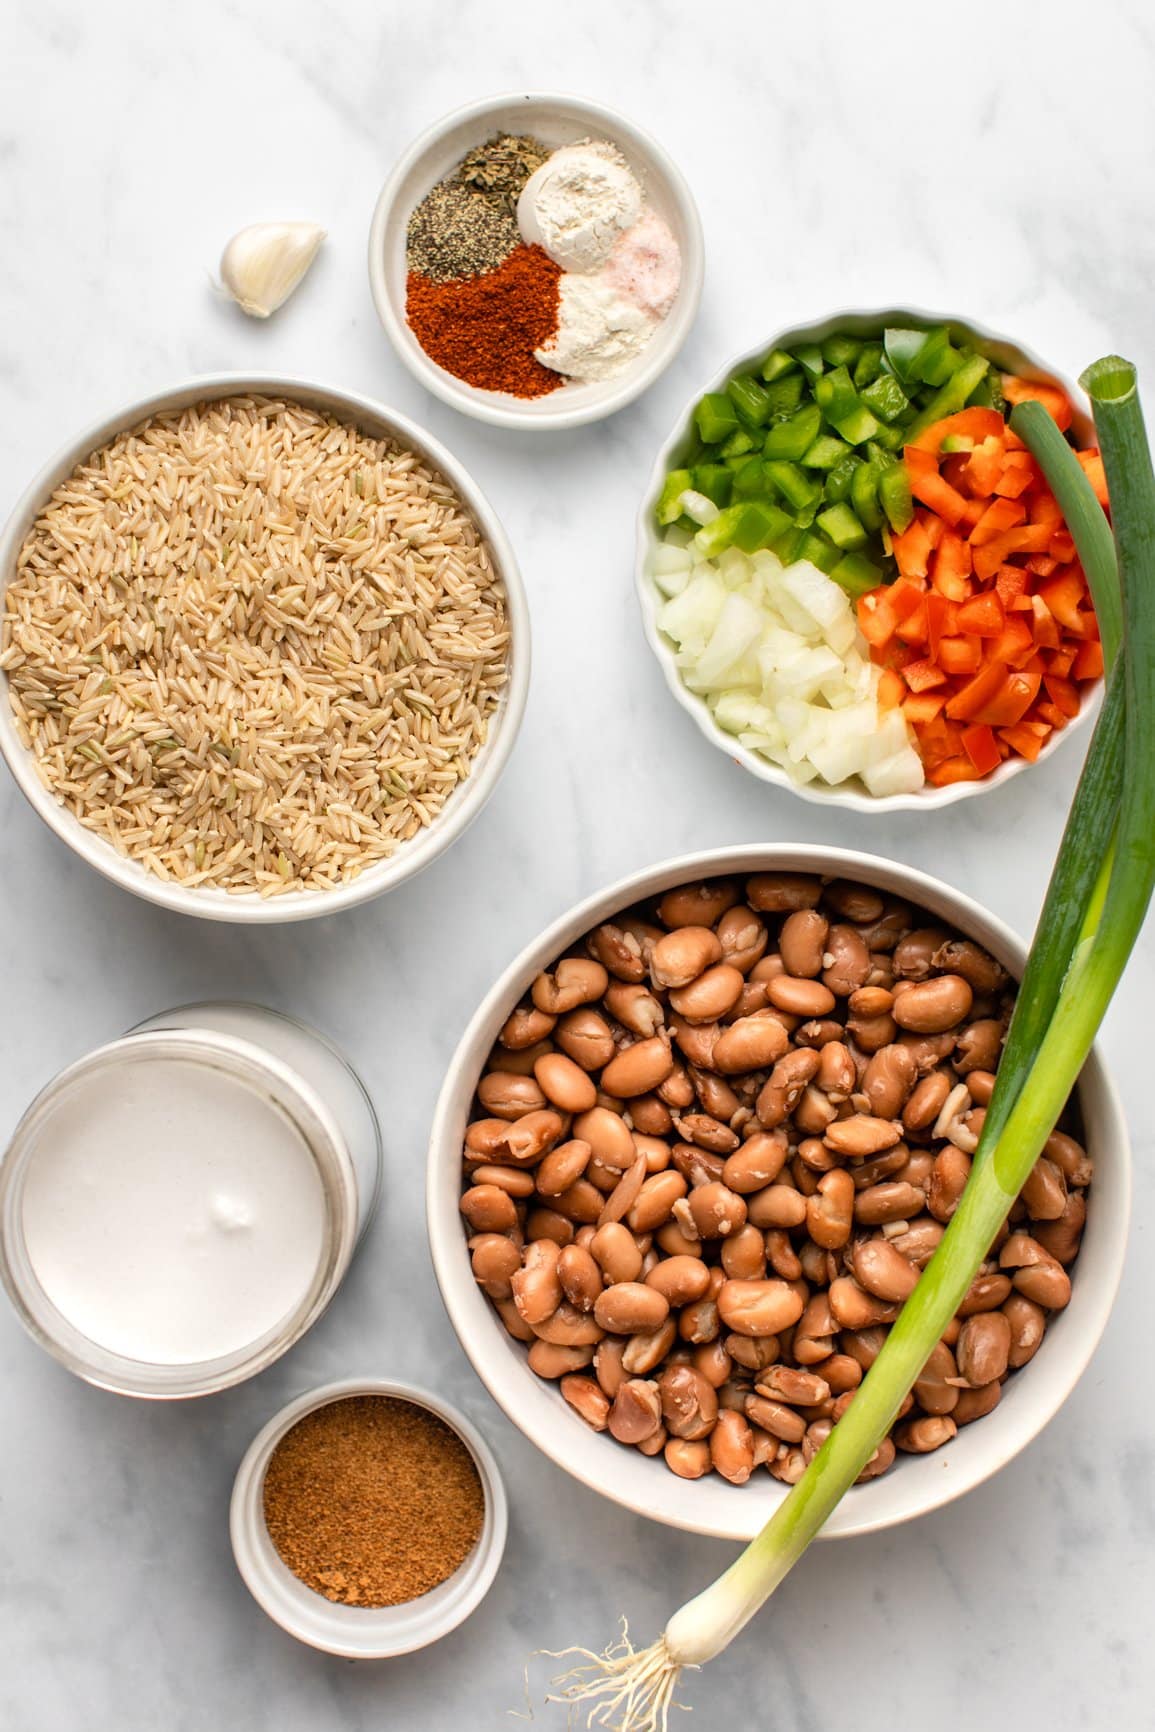 ingredients for rice and peas in small white bowls on light background